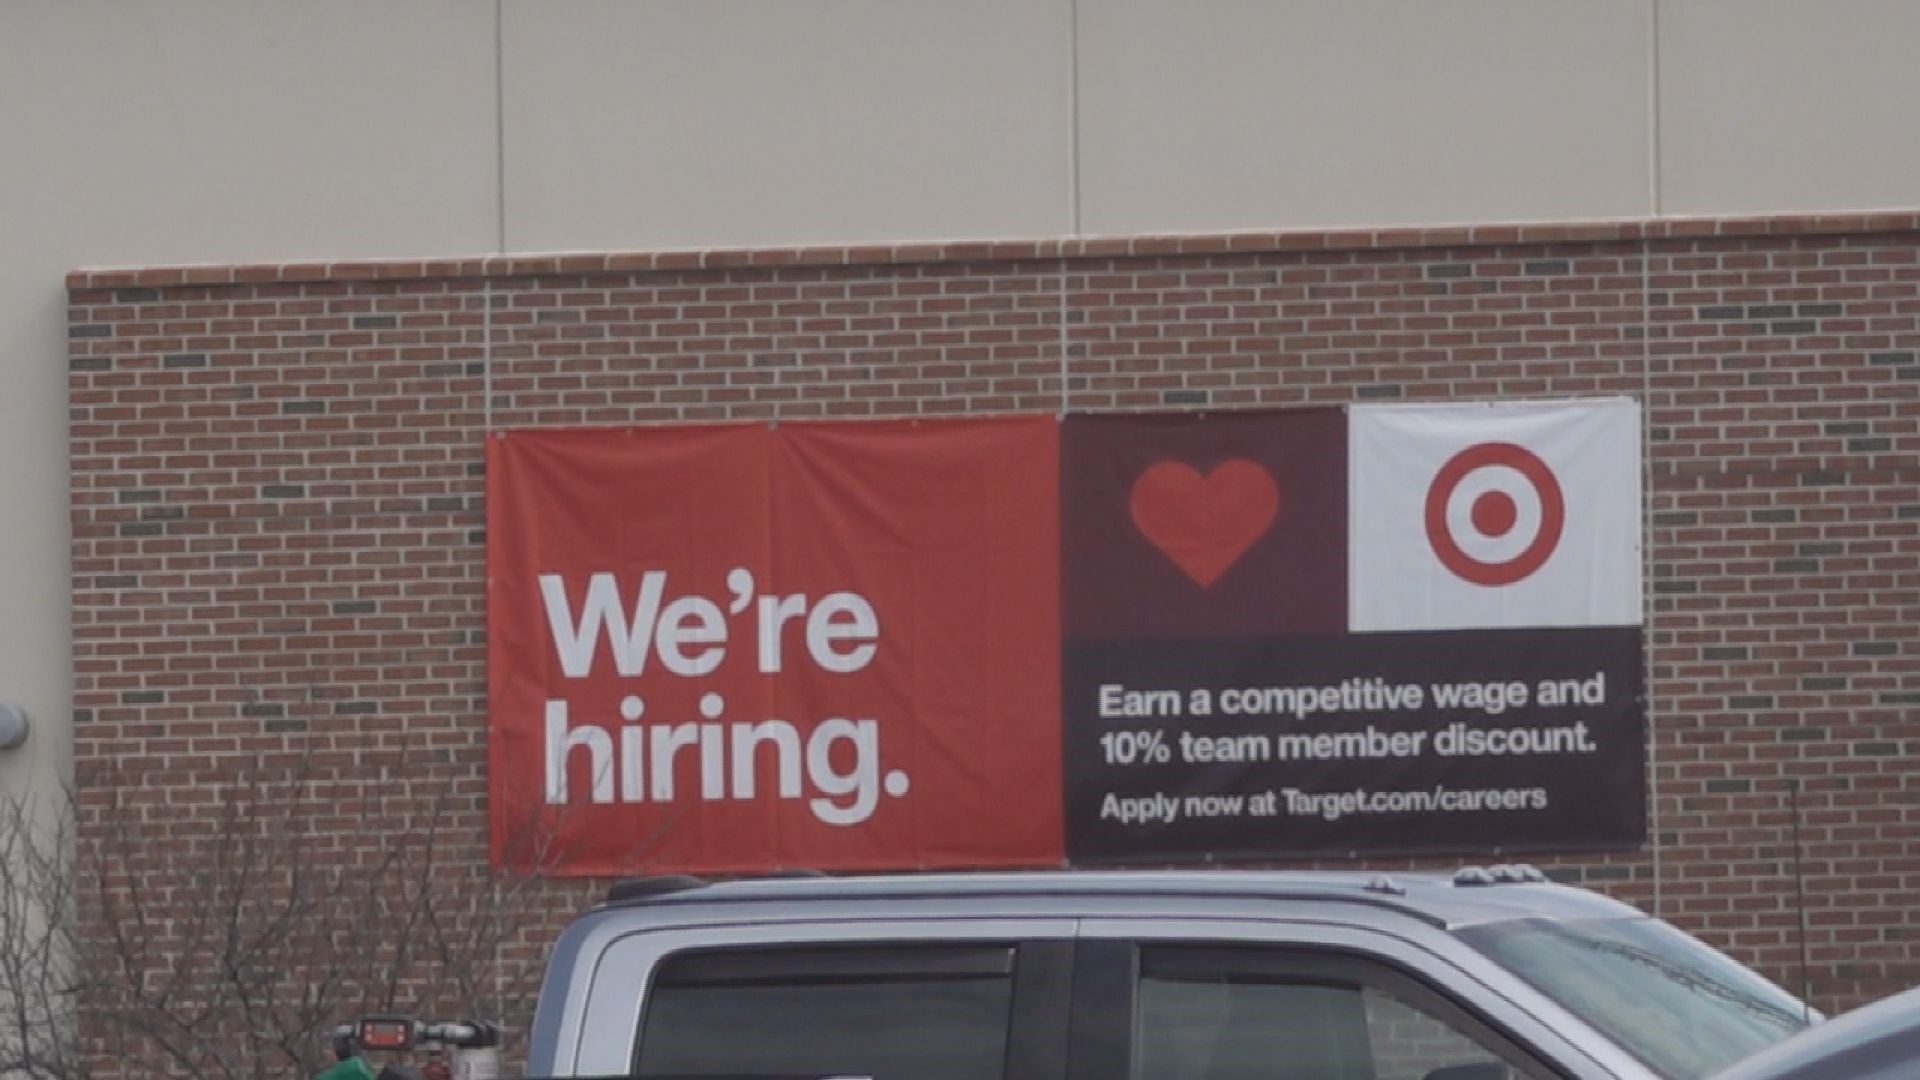 Target is the latest company to boost its starting salaries in an effort to attract more employees